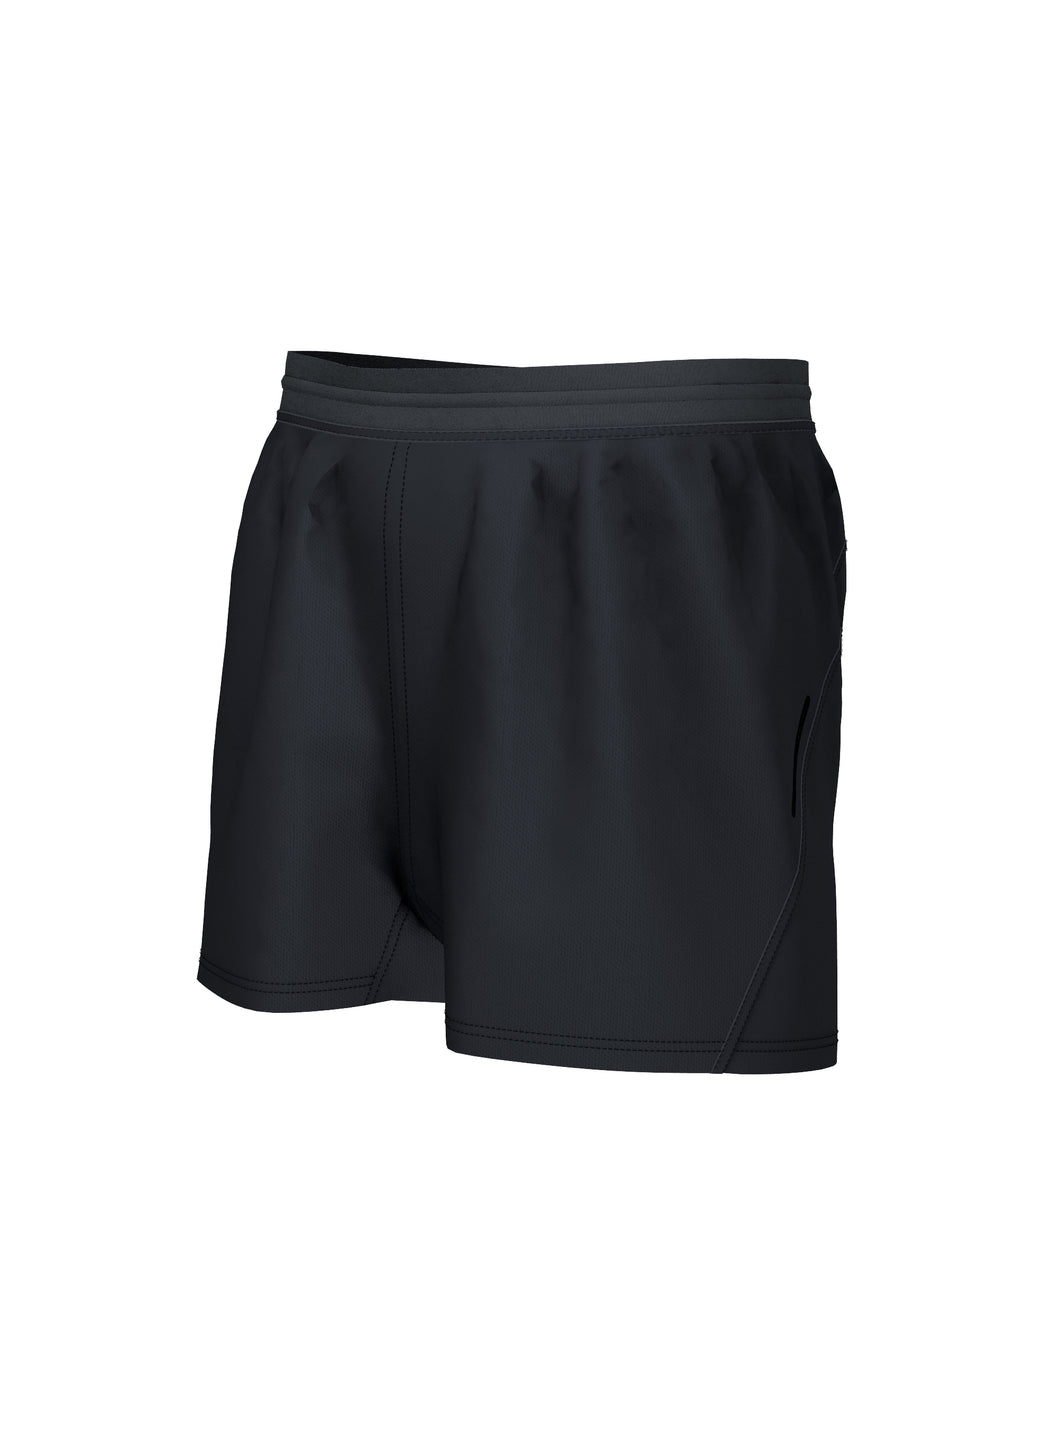 Arrows Impact Pro Rugby Short